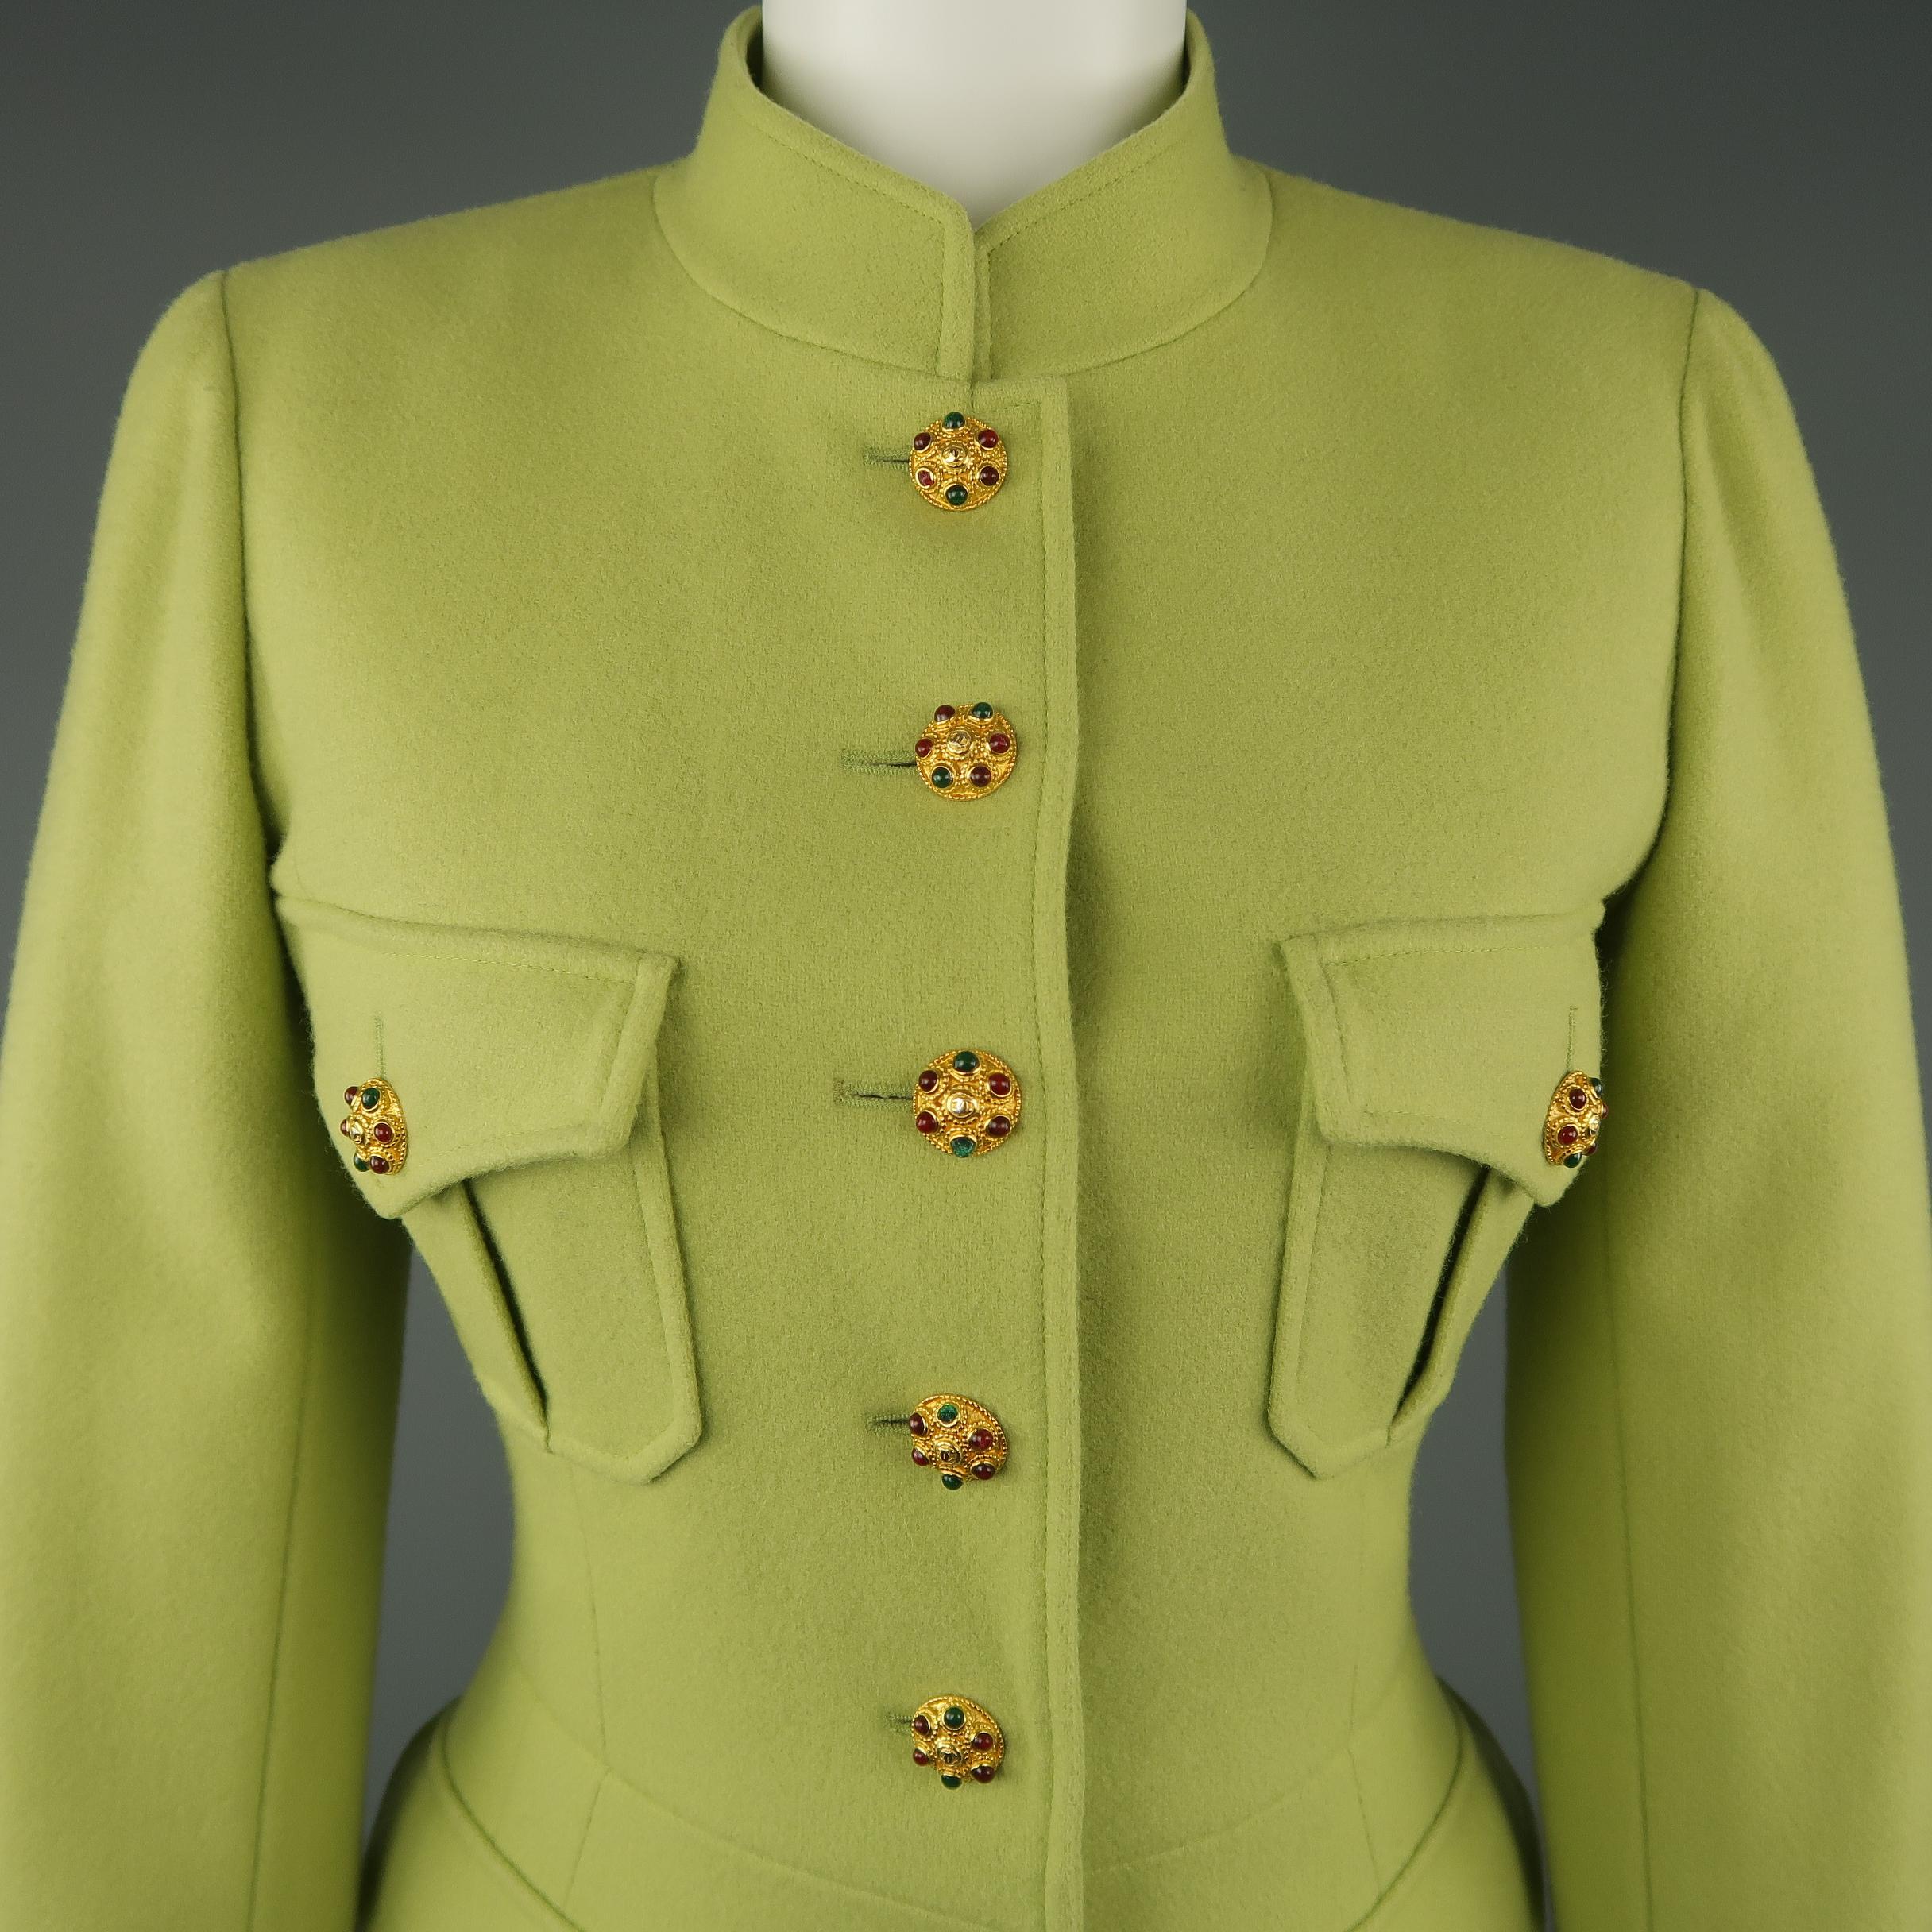 Vintage circa Fall Winter 1996 CHANEL BOUTIQUE military style jacket comes in light pistachio green wool with a stand up Nehru collar, four patch flap pockets, six button front, silk Camellia lining with chain weight, functional button cuffs and